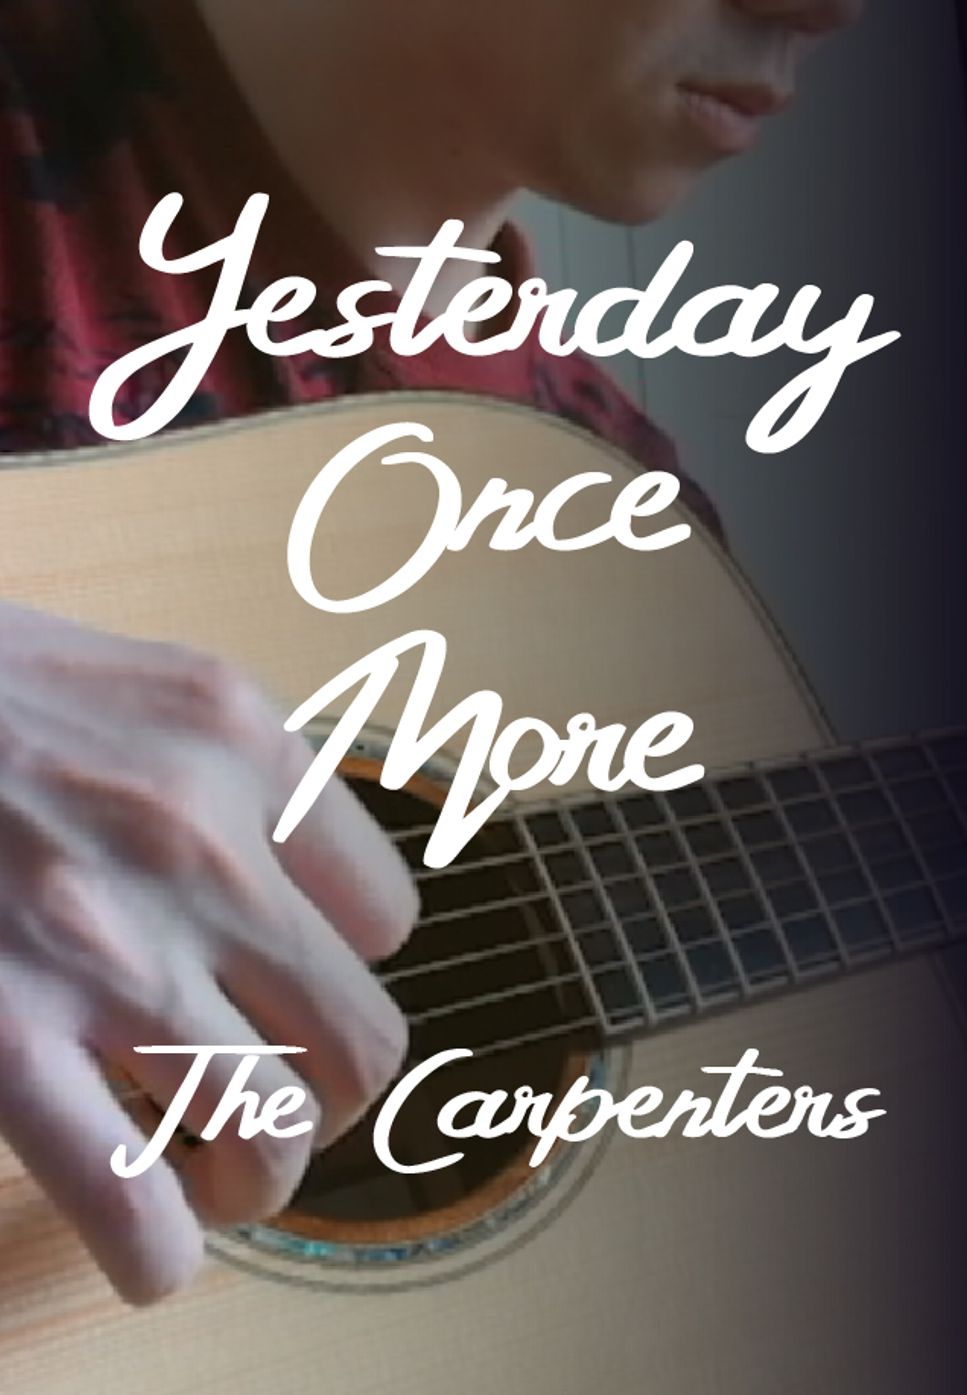 The Carpenters - Yesterday Once More Fingerstyle (DADF#AD capo 3) by HowMing